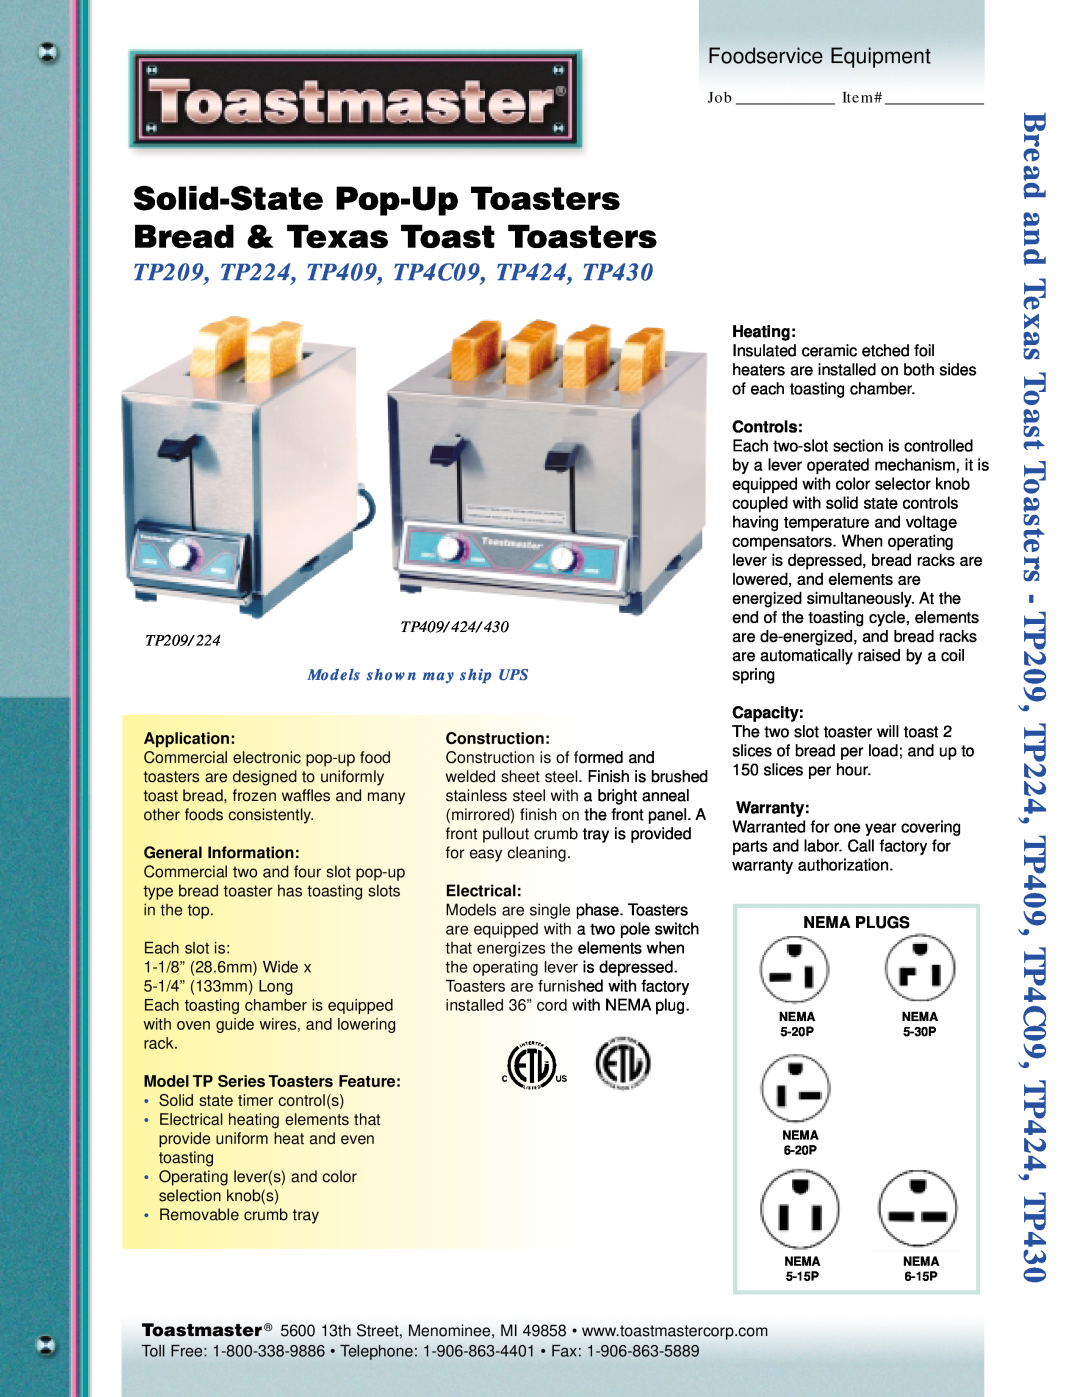 Toastmaster TP424, TP430 installation manual Warning In Case Of Fire, Solid State Slot Toaster, HT409, HT424, BTW09, BTW24 